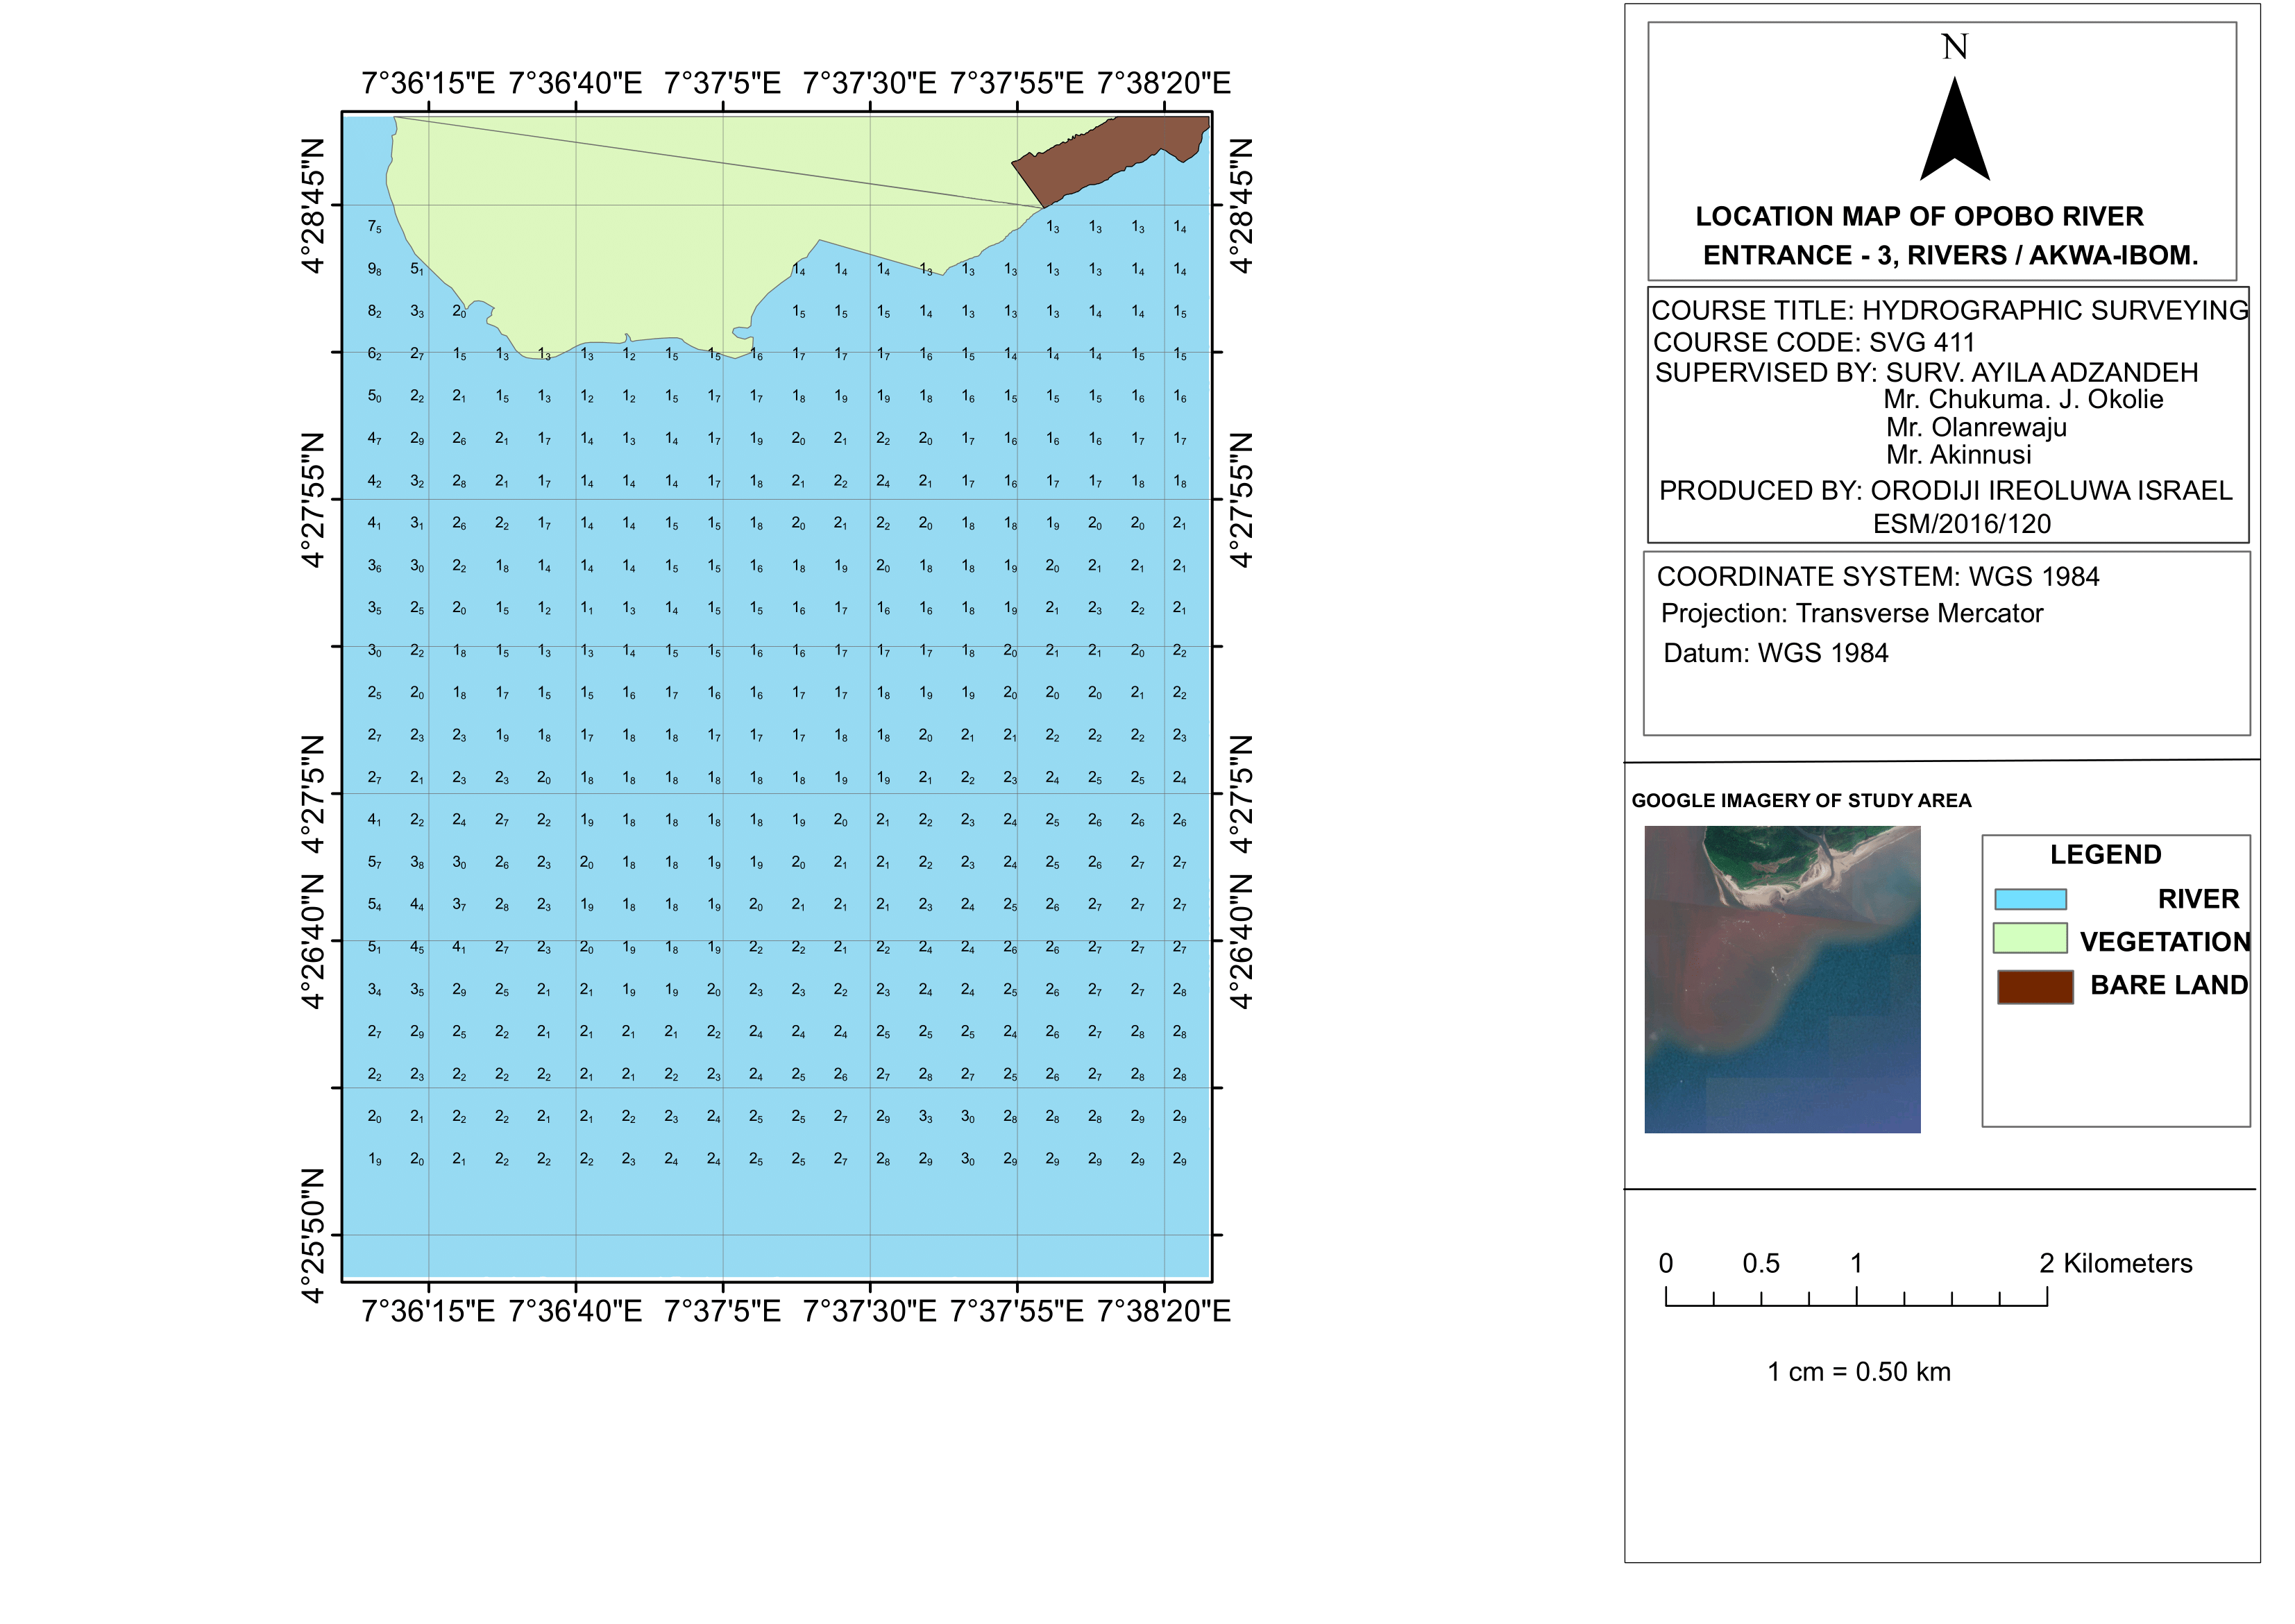 PRODUCTION OF A BATHYMETRIC CHART